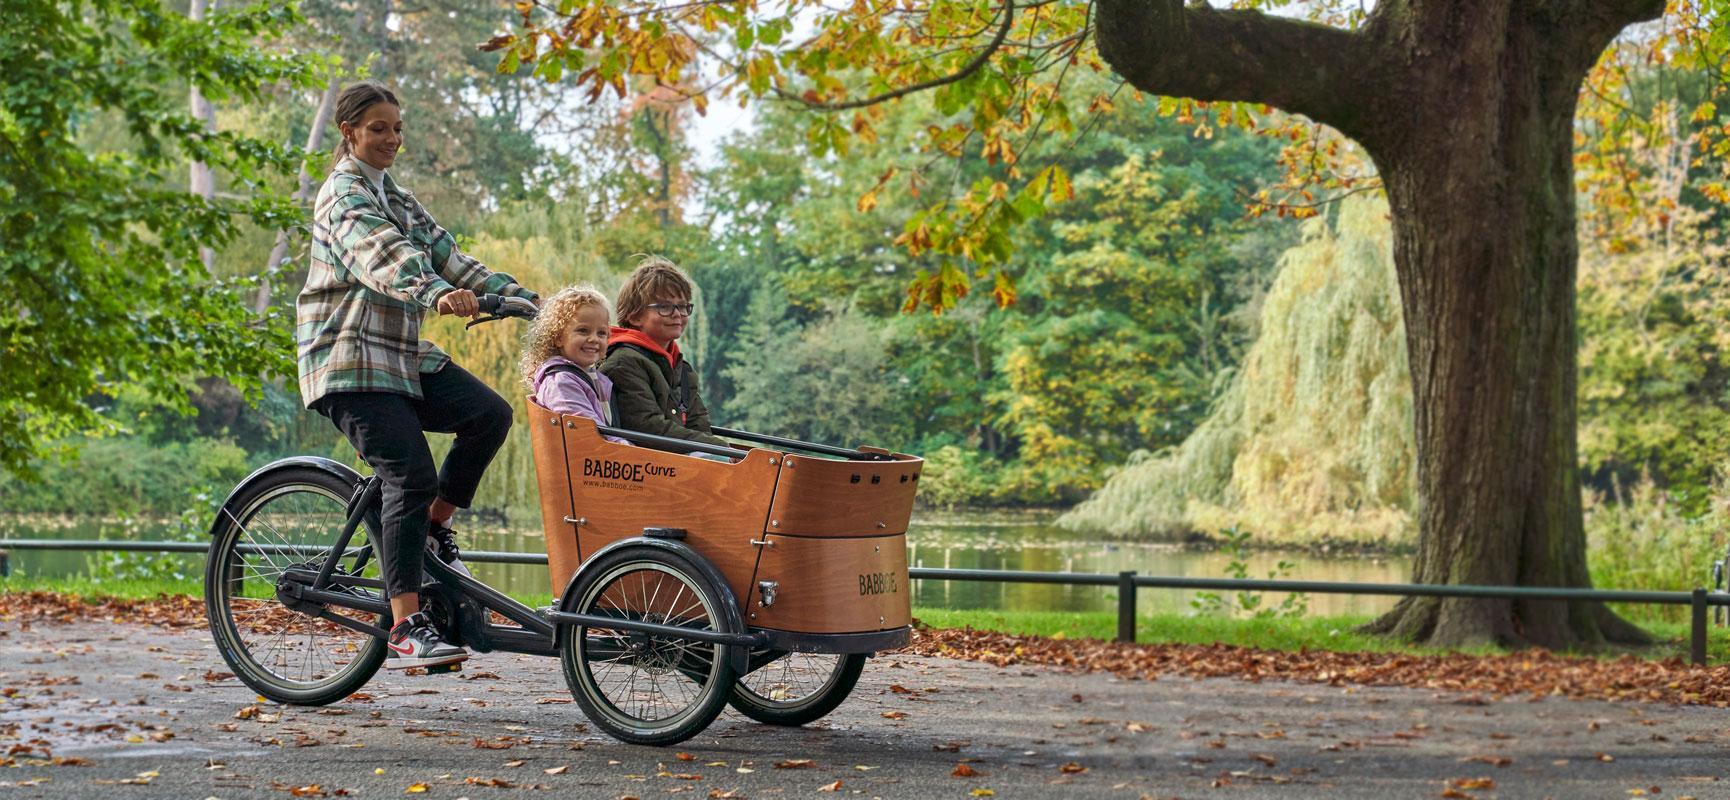 Consider buying an used electric cargo bike: read our tips